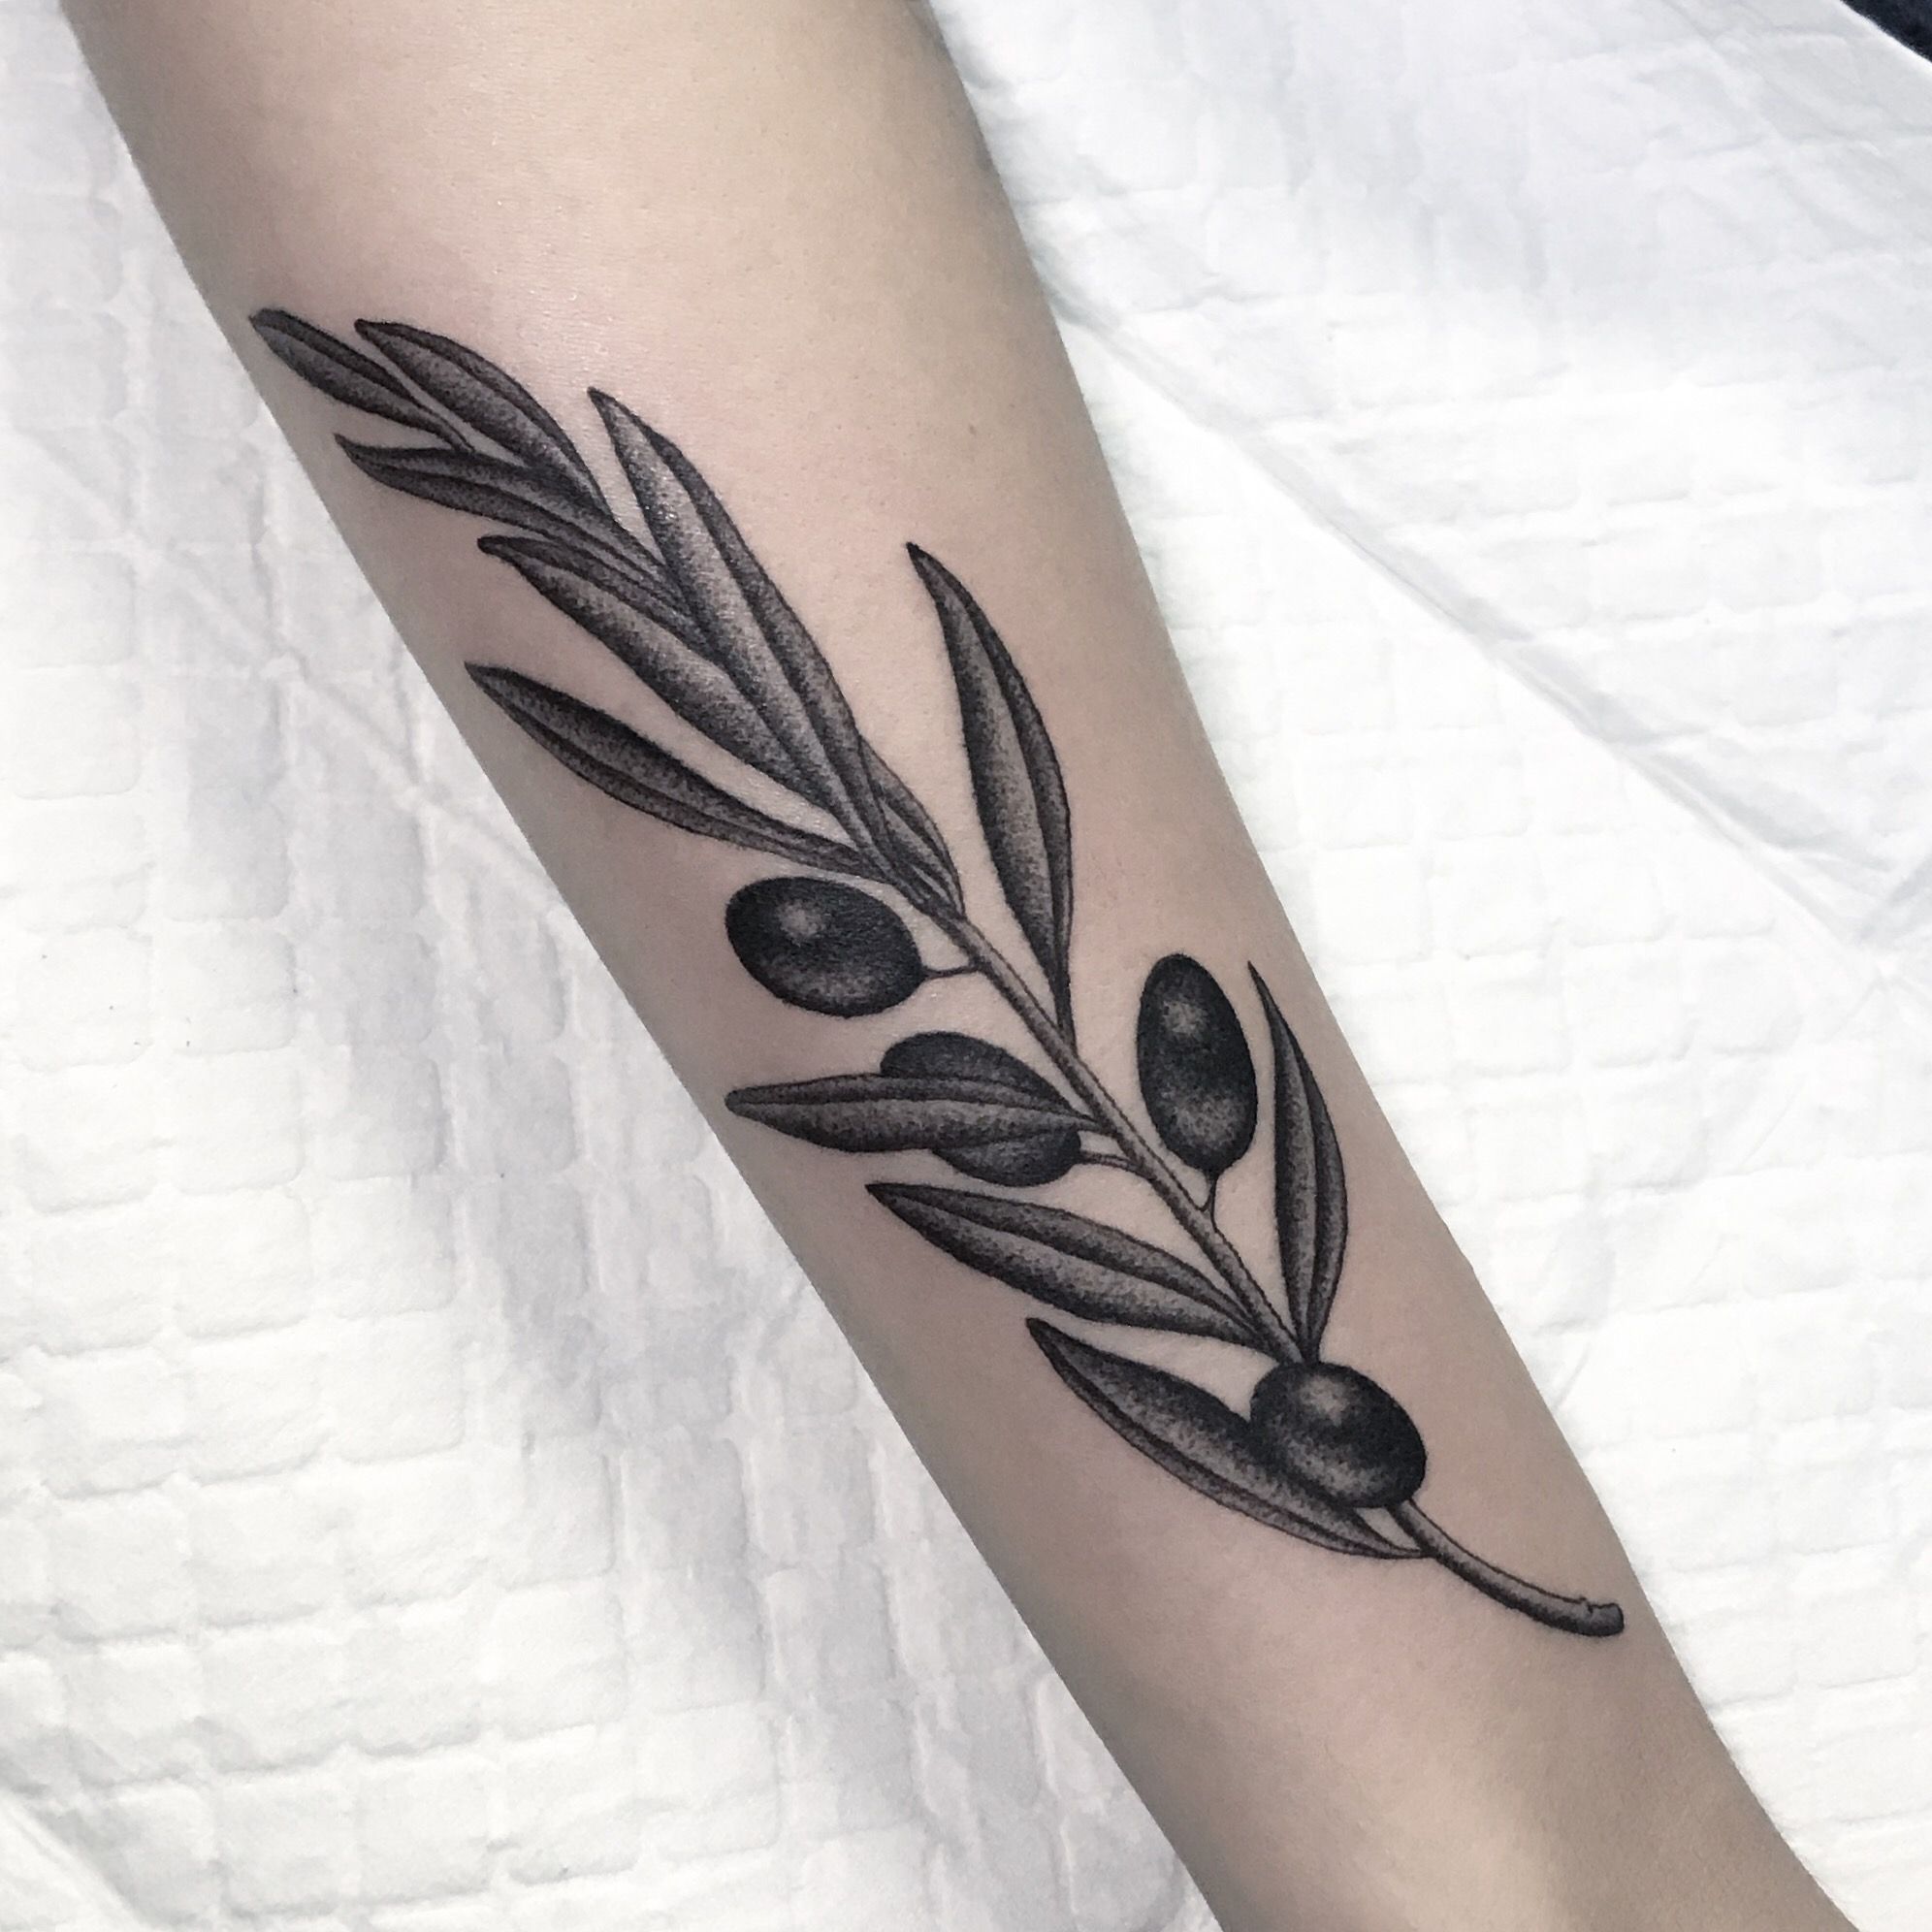 Olive Branch Tattoo Directory: Find Peace with Ink! (23 Ideas) | Inkbox™